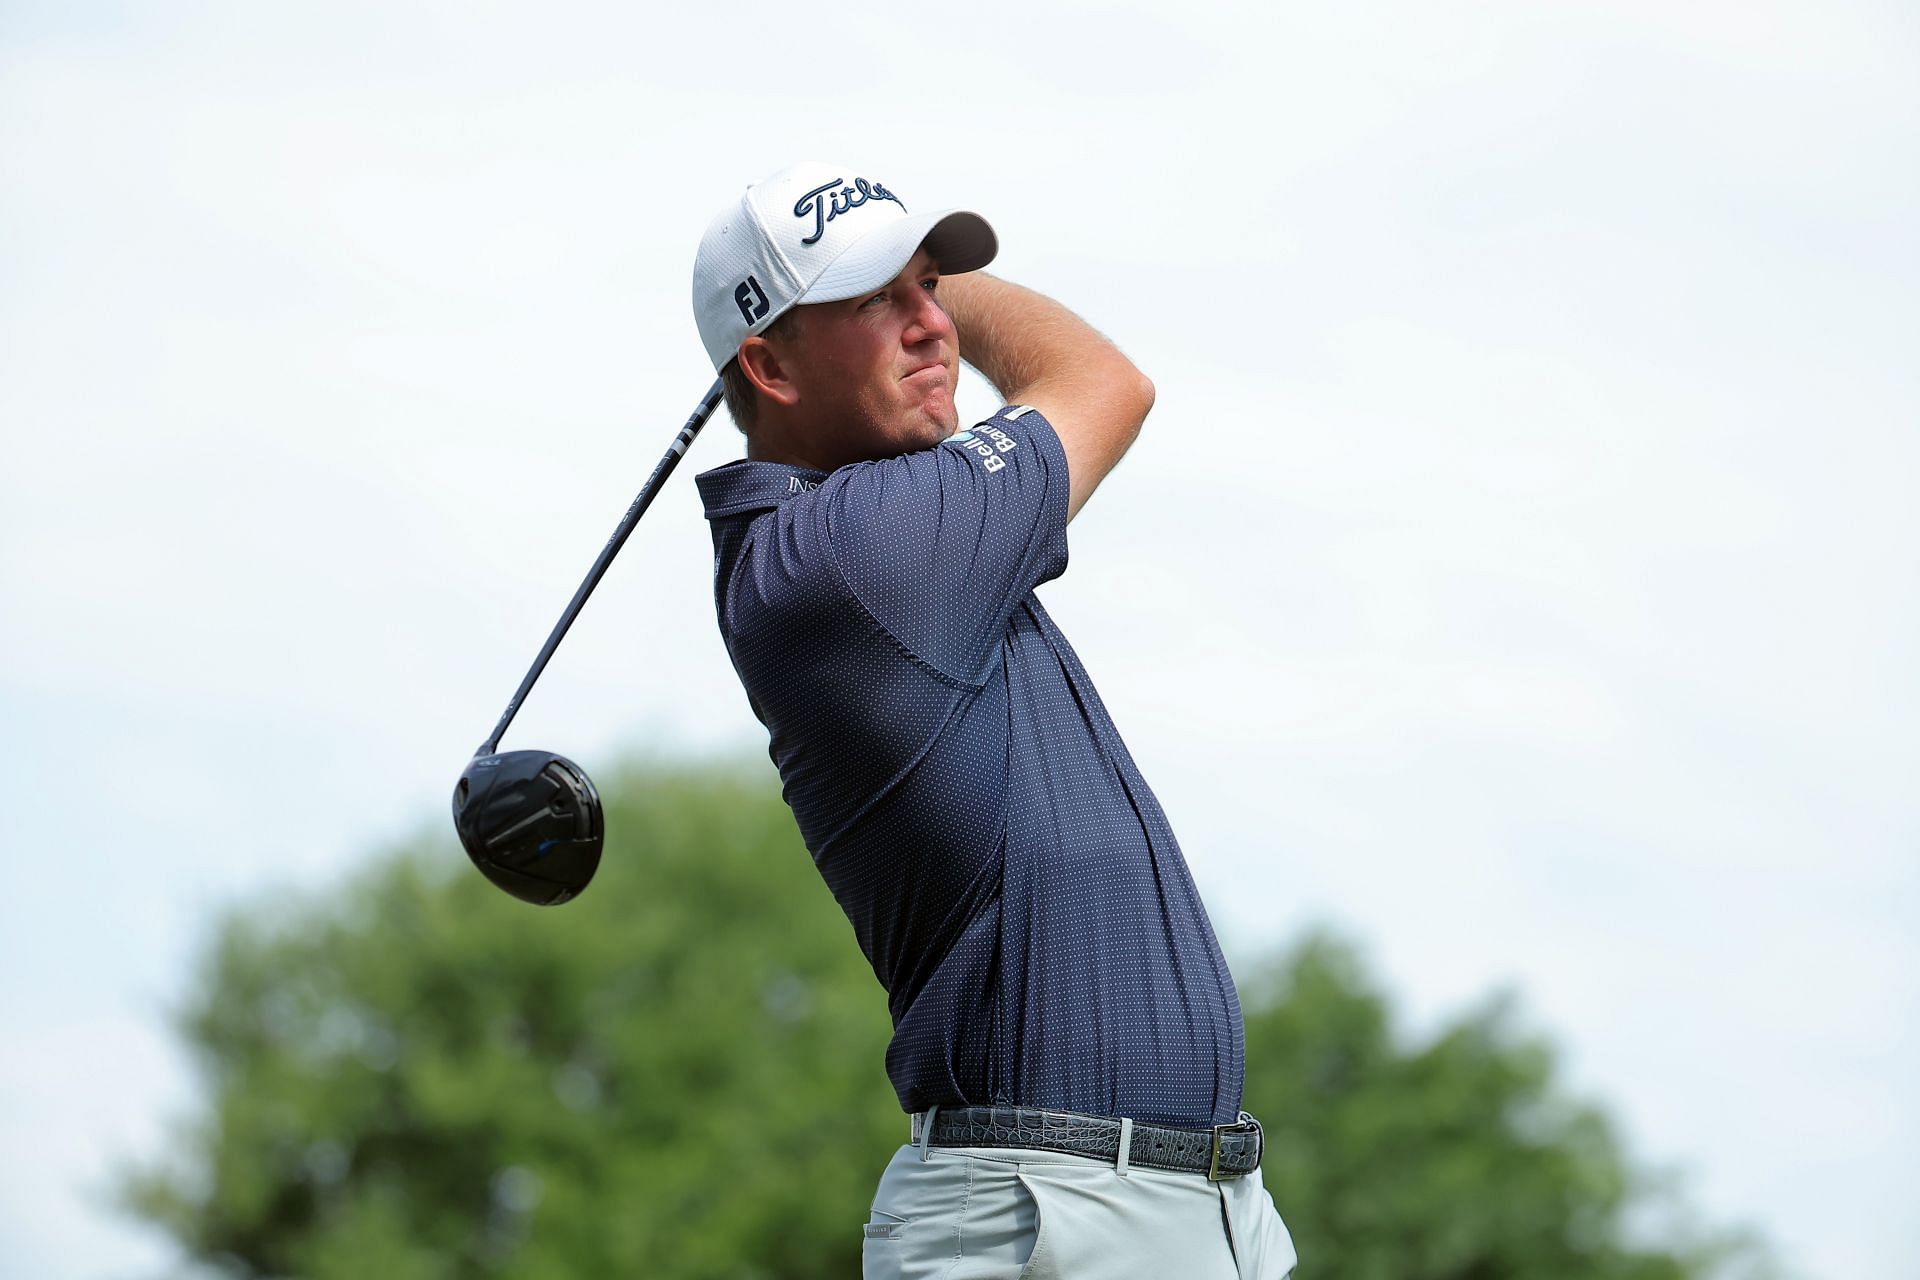 Tom Hoge was placed second after round 1 of the 2023 Charles Schwab Challenge